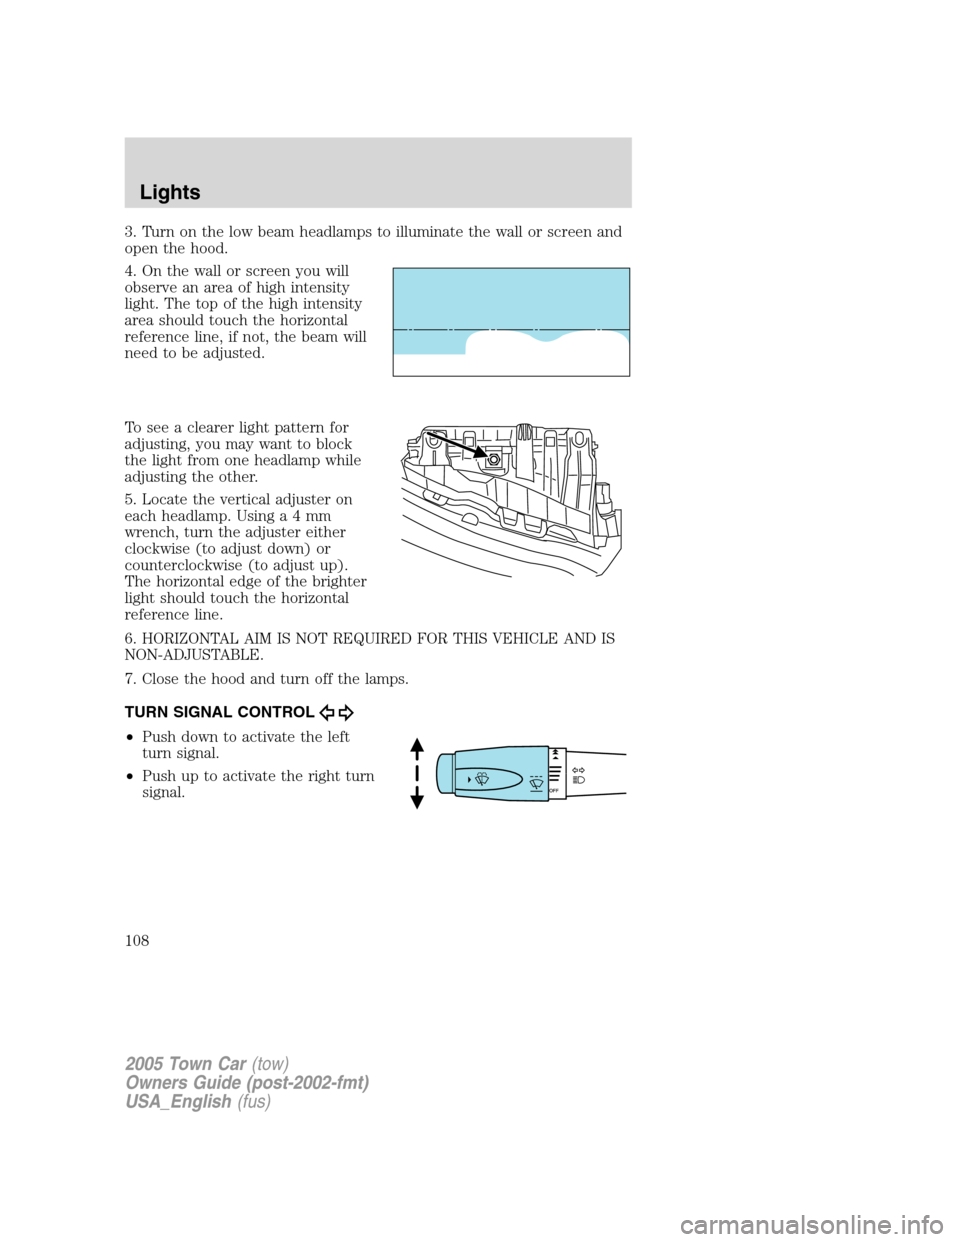 LINCOLN TOWN CAR 2005  Owners Manual 3. Turn on the low beam headlamps to illuminate the wall or screen and
open the hood.
4. On the wall or screen you will
observe an area of high intensity
light. The top of the high intensity
area shou